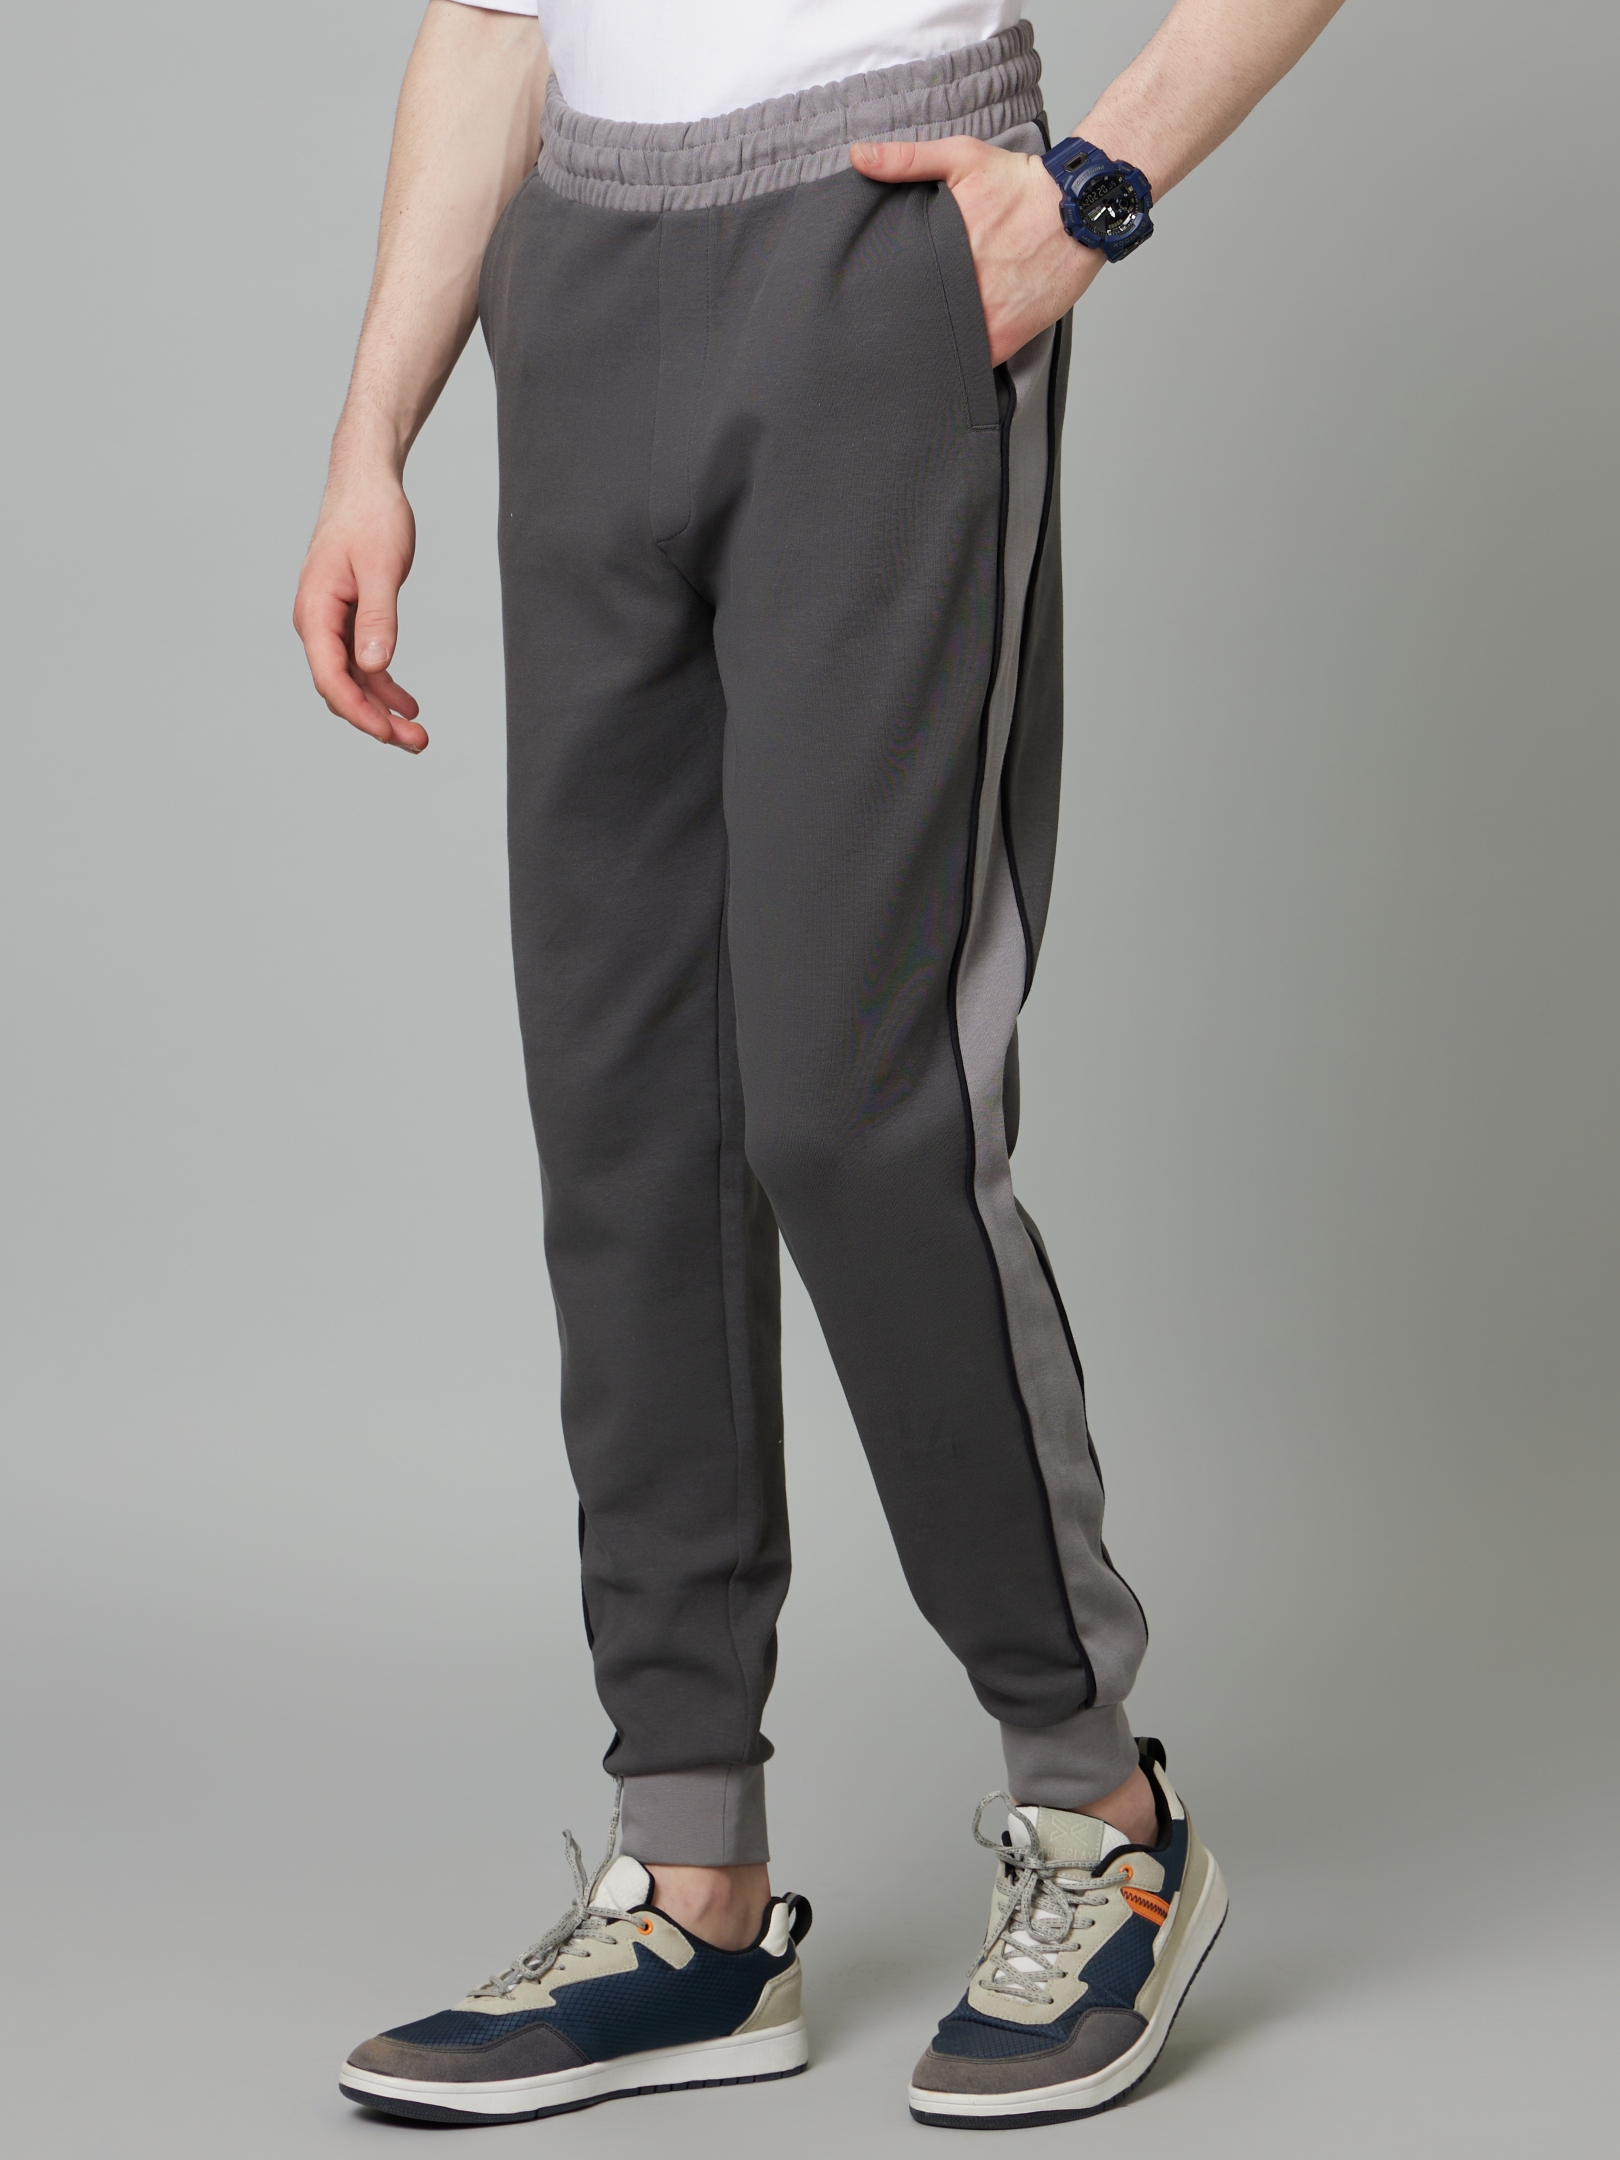 Men's Grey Cotton Blend Solid Casual Joggers